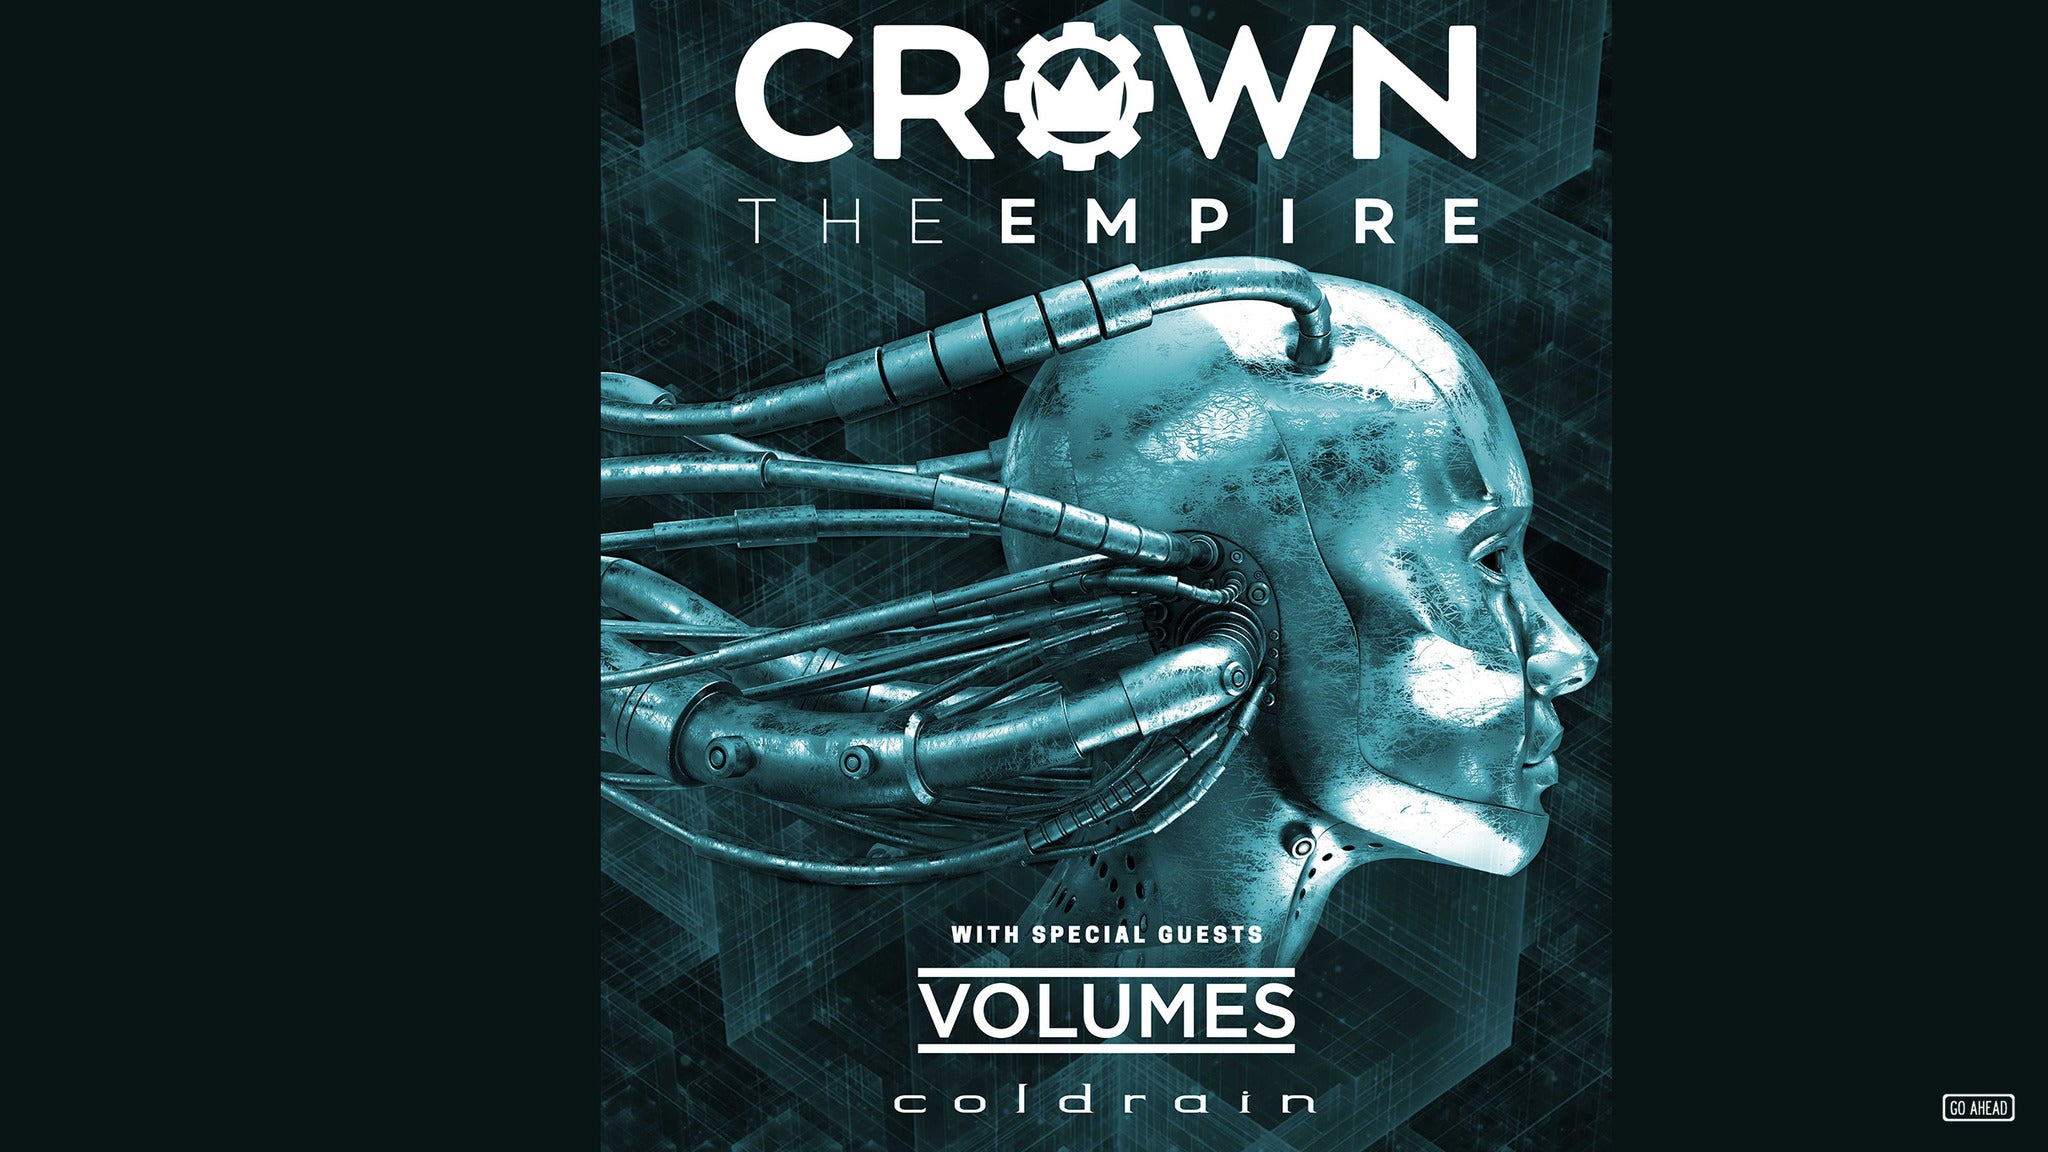 CROWN THE EMPIRE : The Fallout 10 Year Anniversary Tour